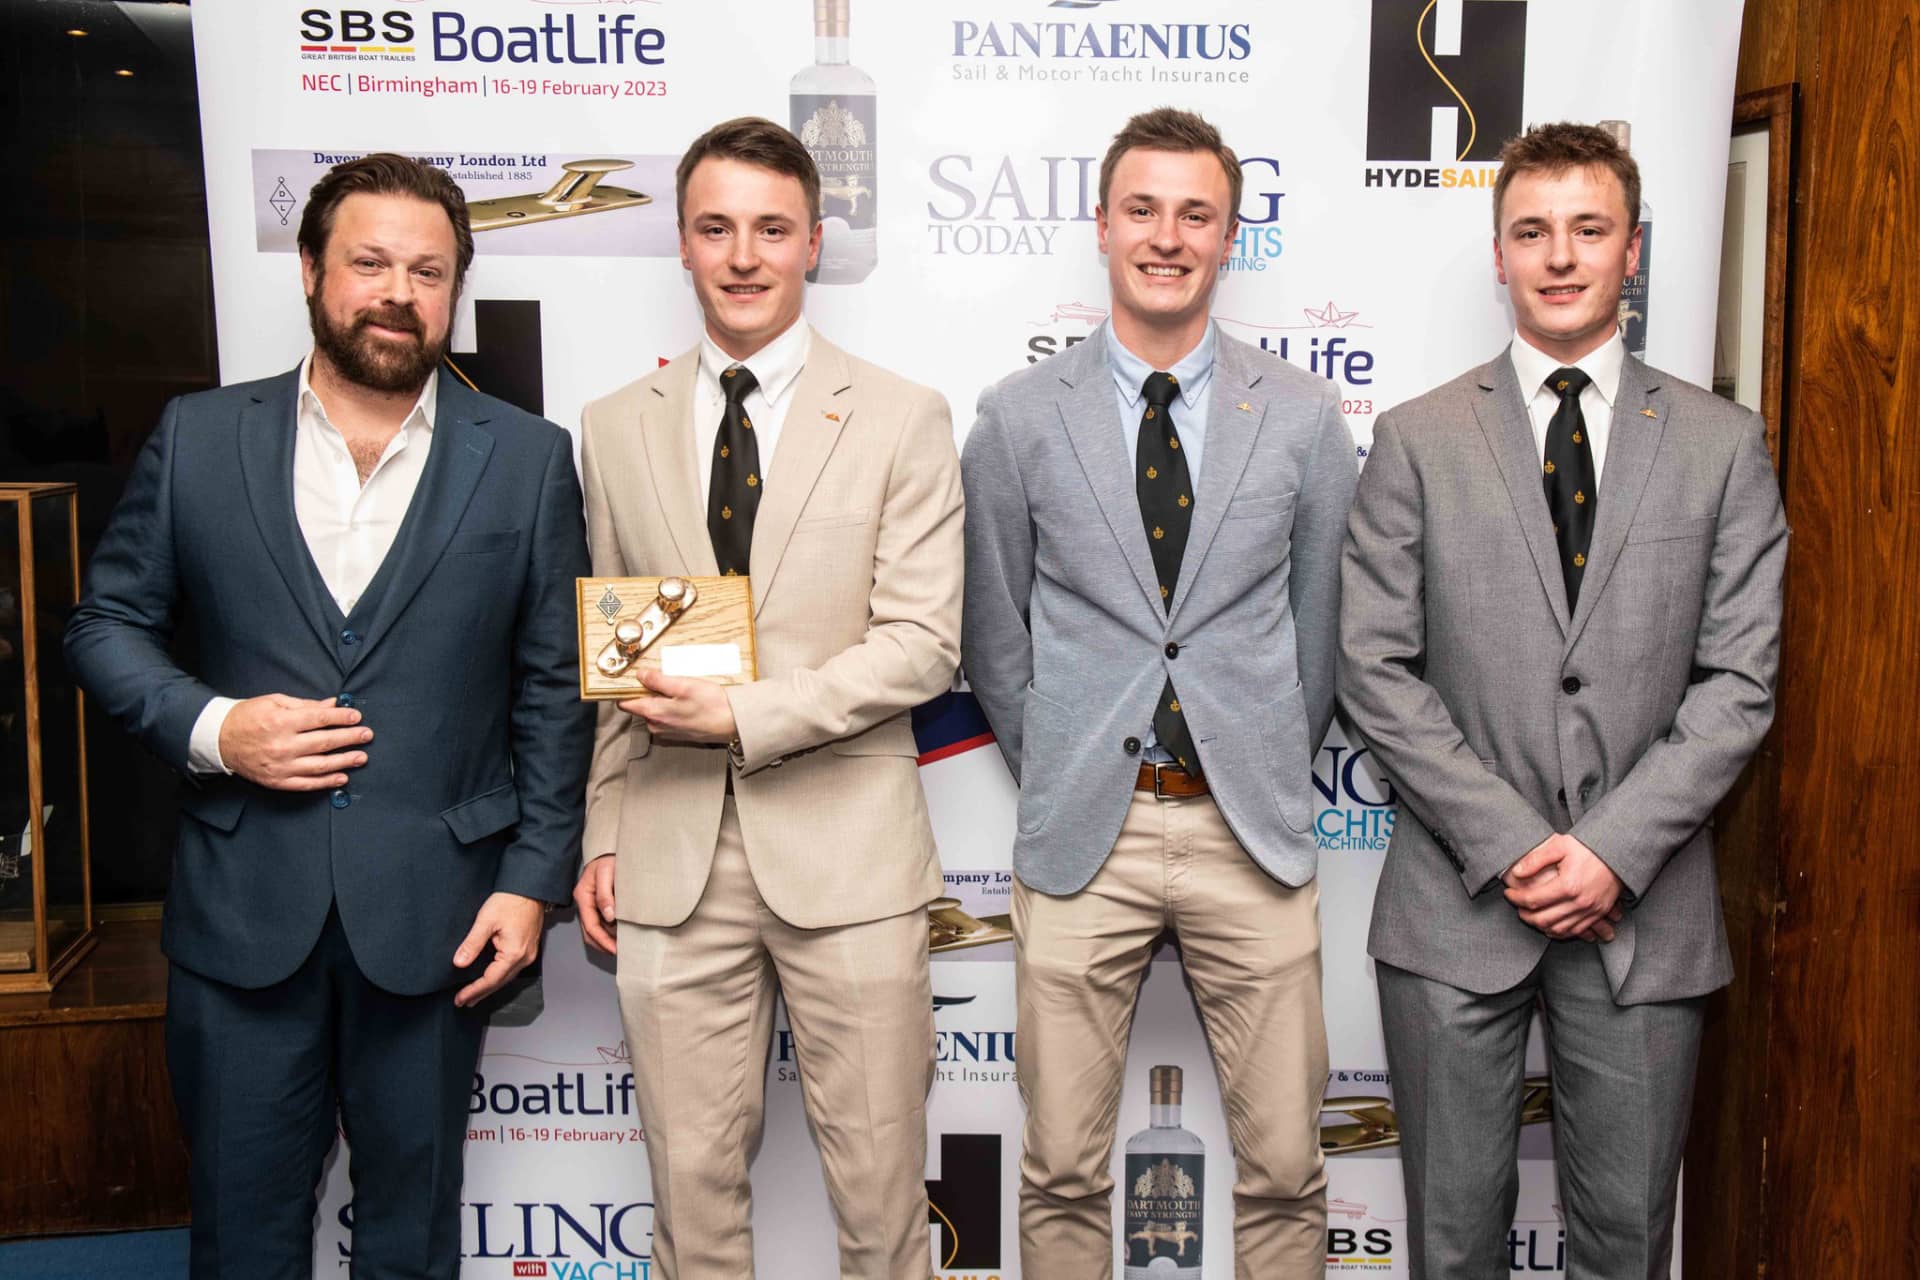 The White Triplets receive sailing award with OTW flash